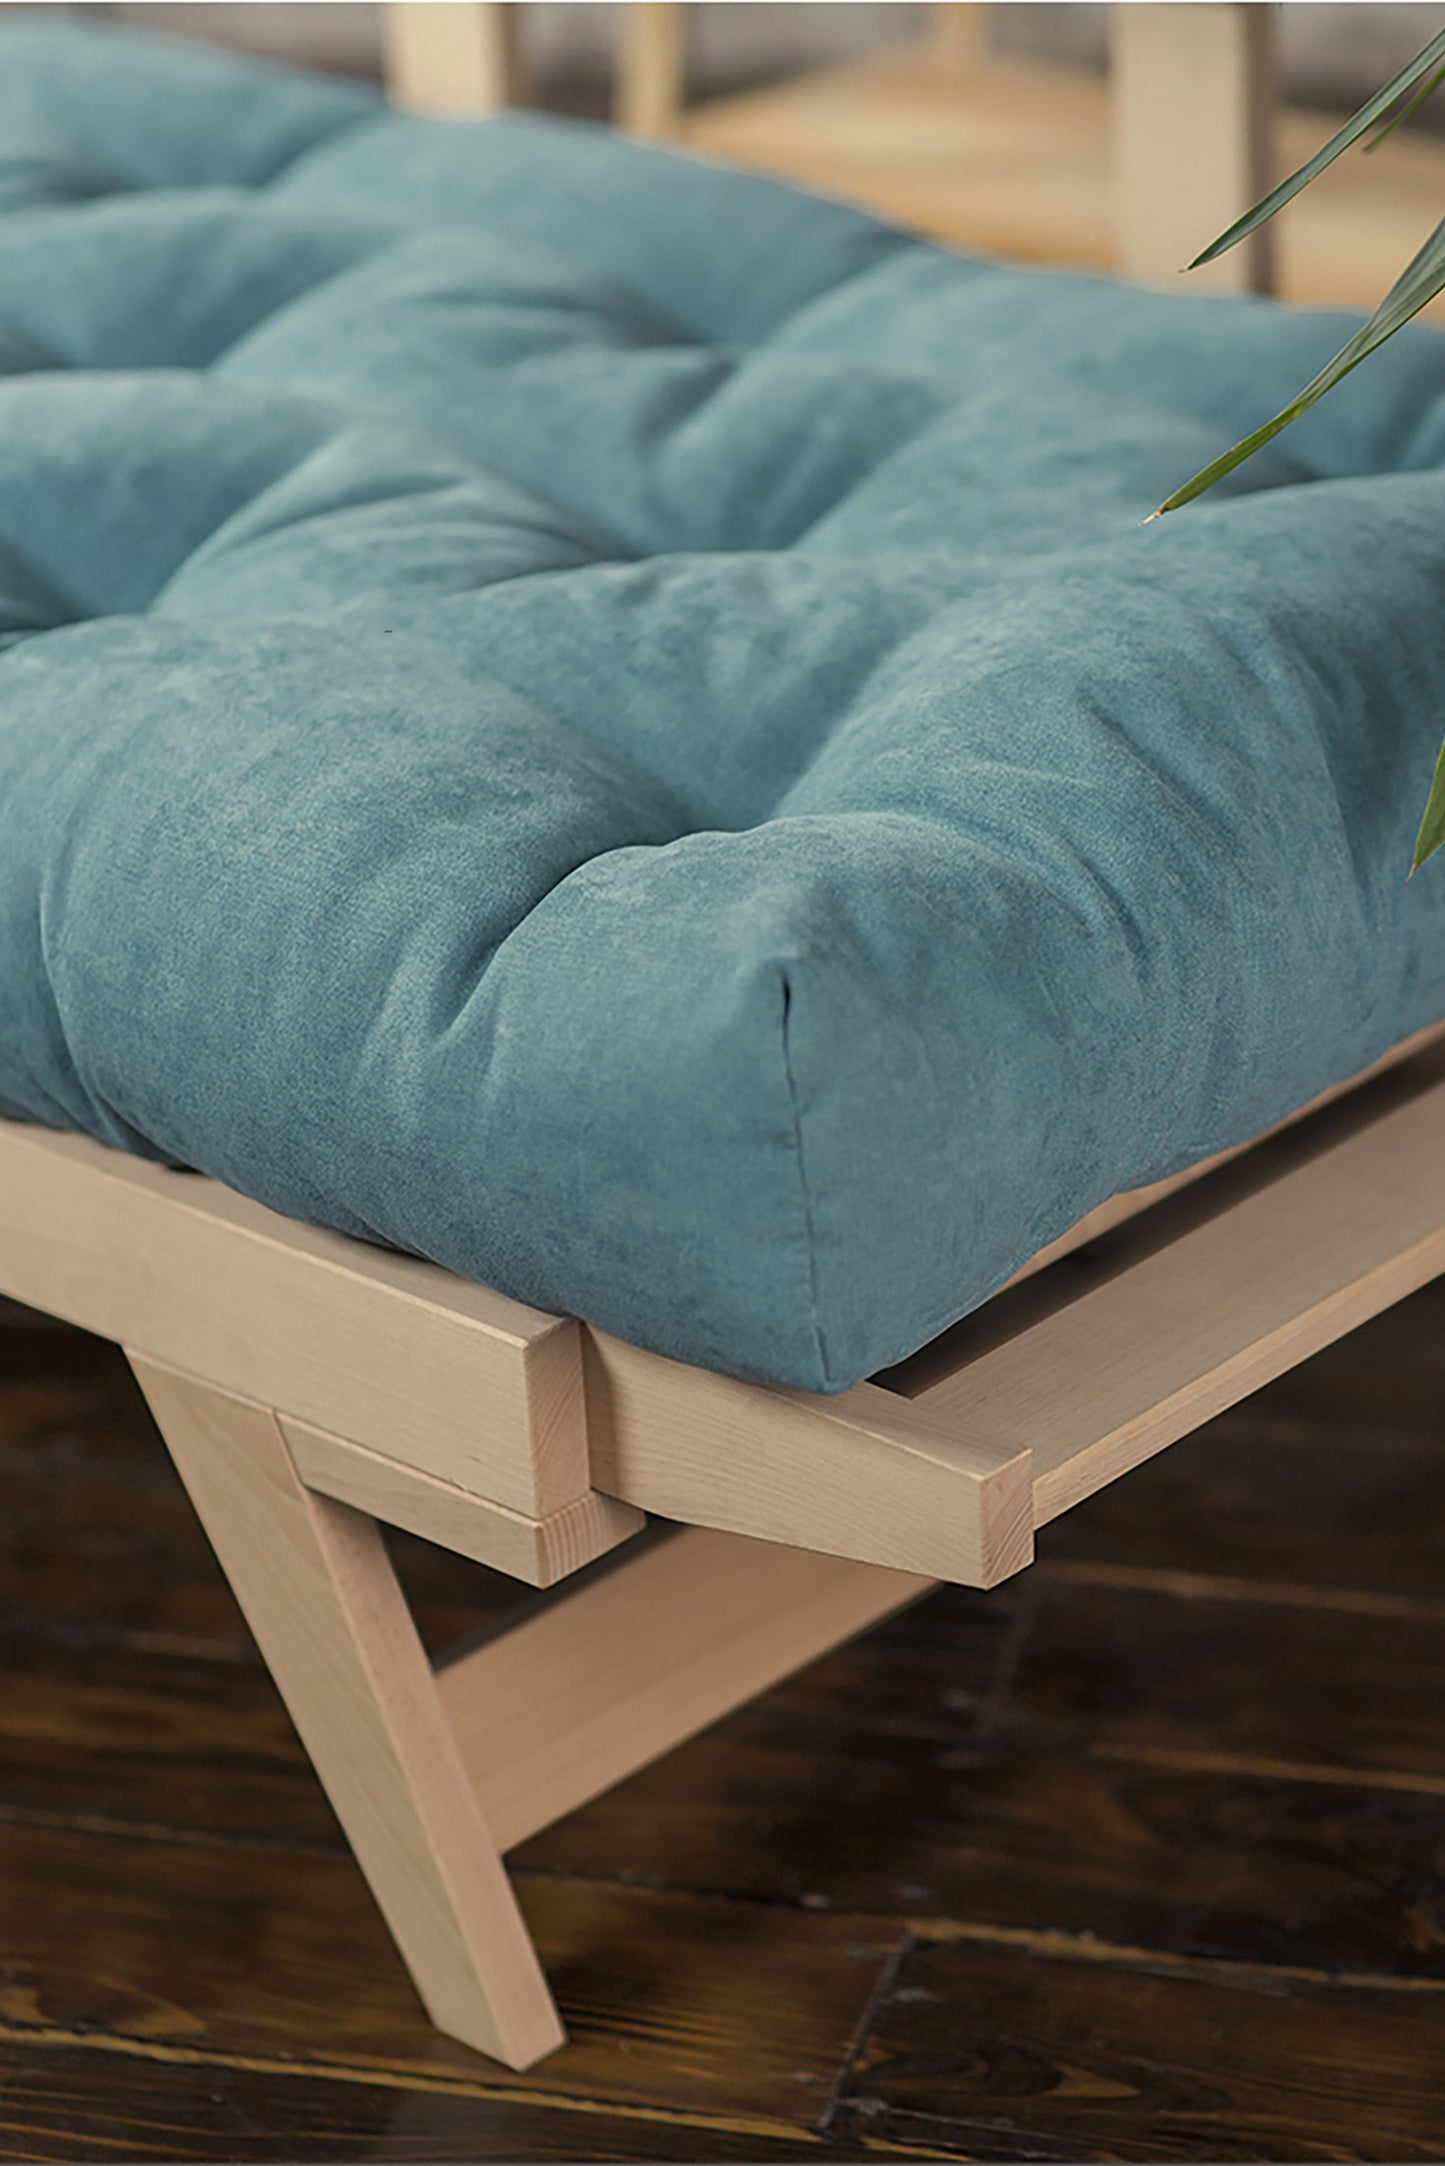 Long Beach Natural Chemical-Free Daybed Sleeper Frame